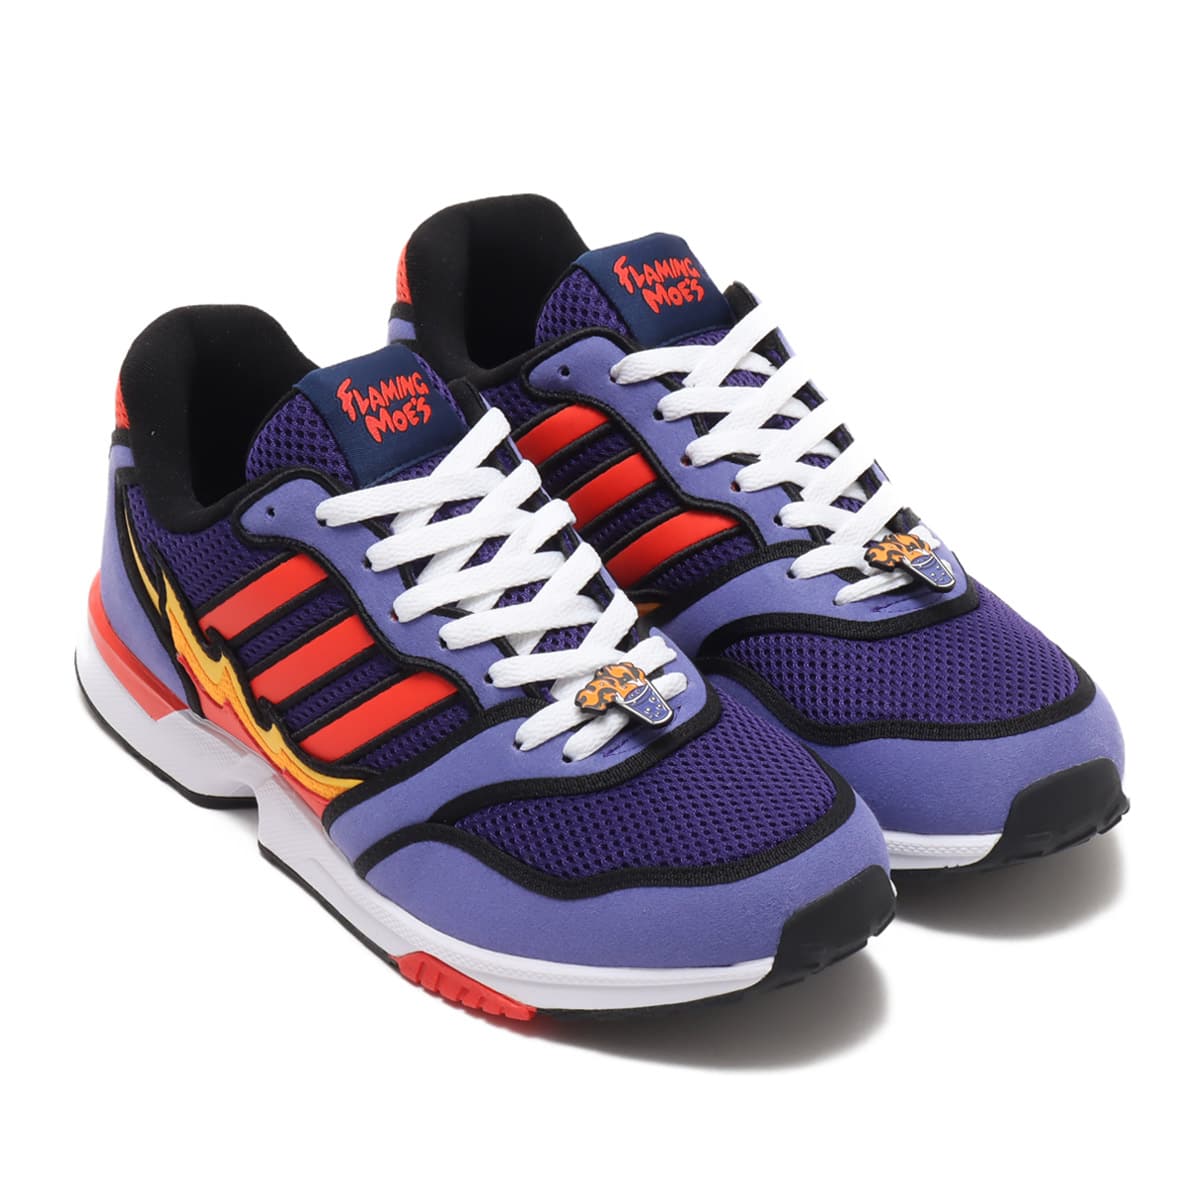 adidas ZX 1000 SIMPSONS FLAMING MOES PURPLE/BRIGHT RED/CORE BLACK 